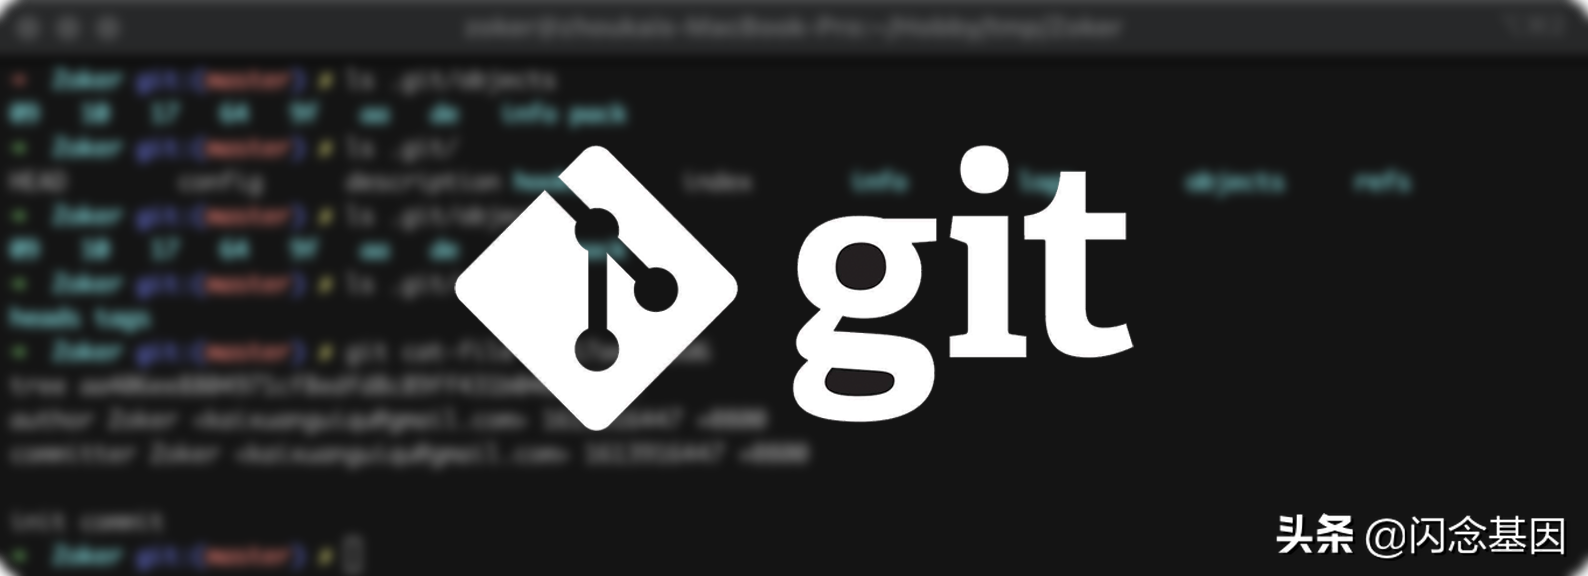 Talk about Git storage principle and related implementation